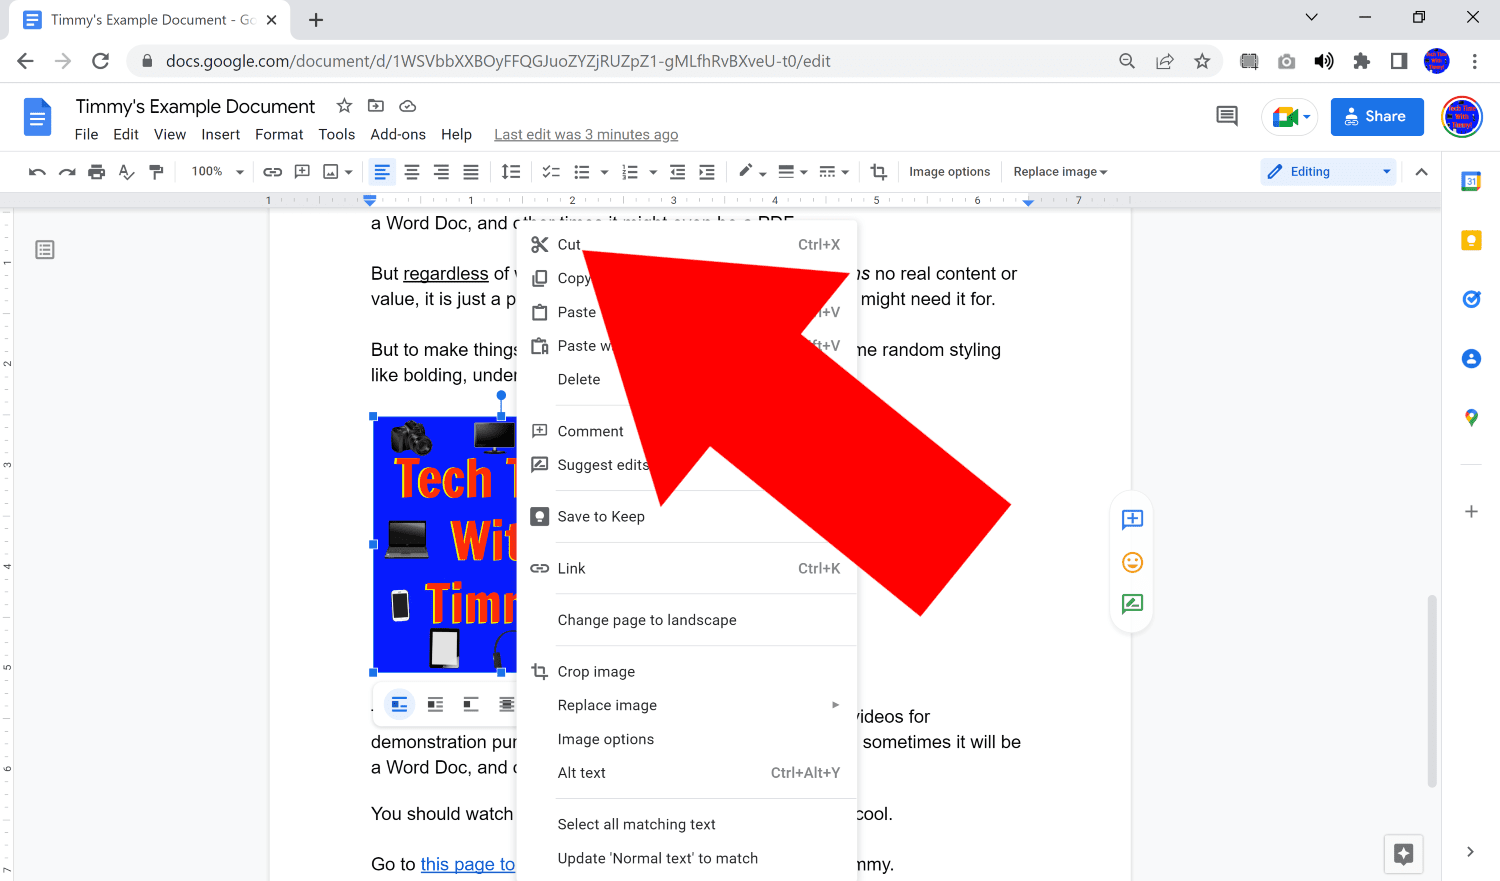 how to mirror an image on google docs